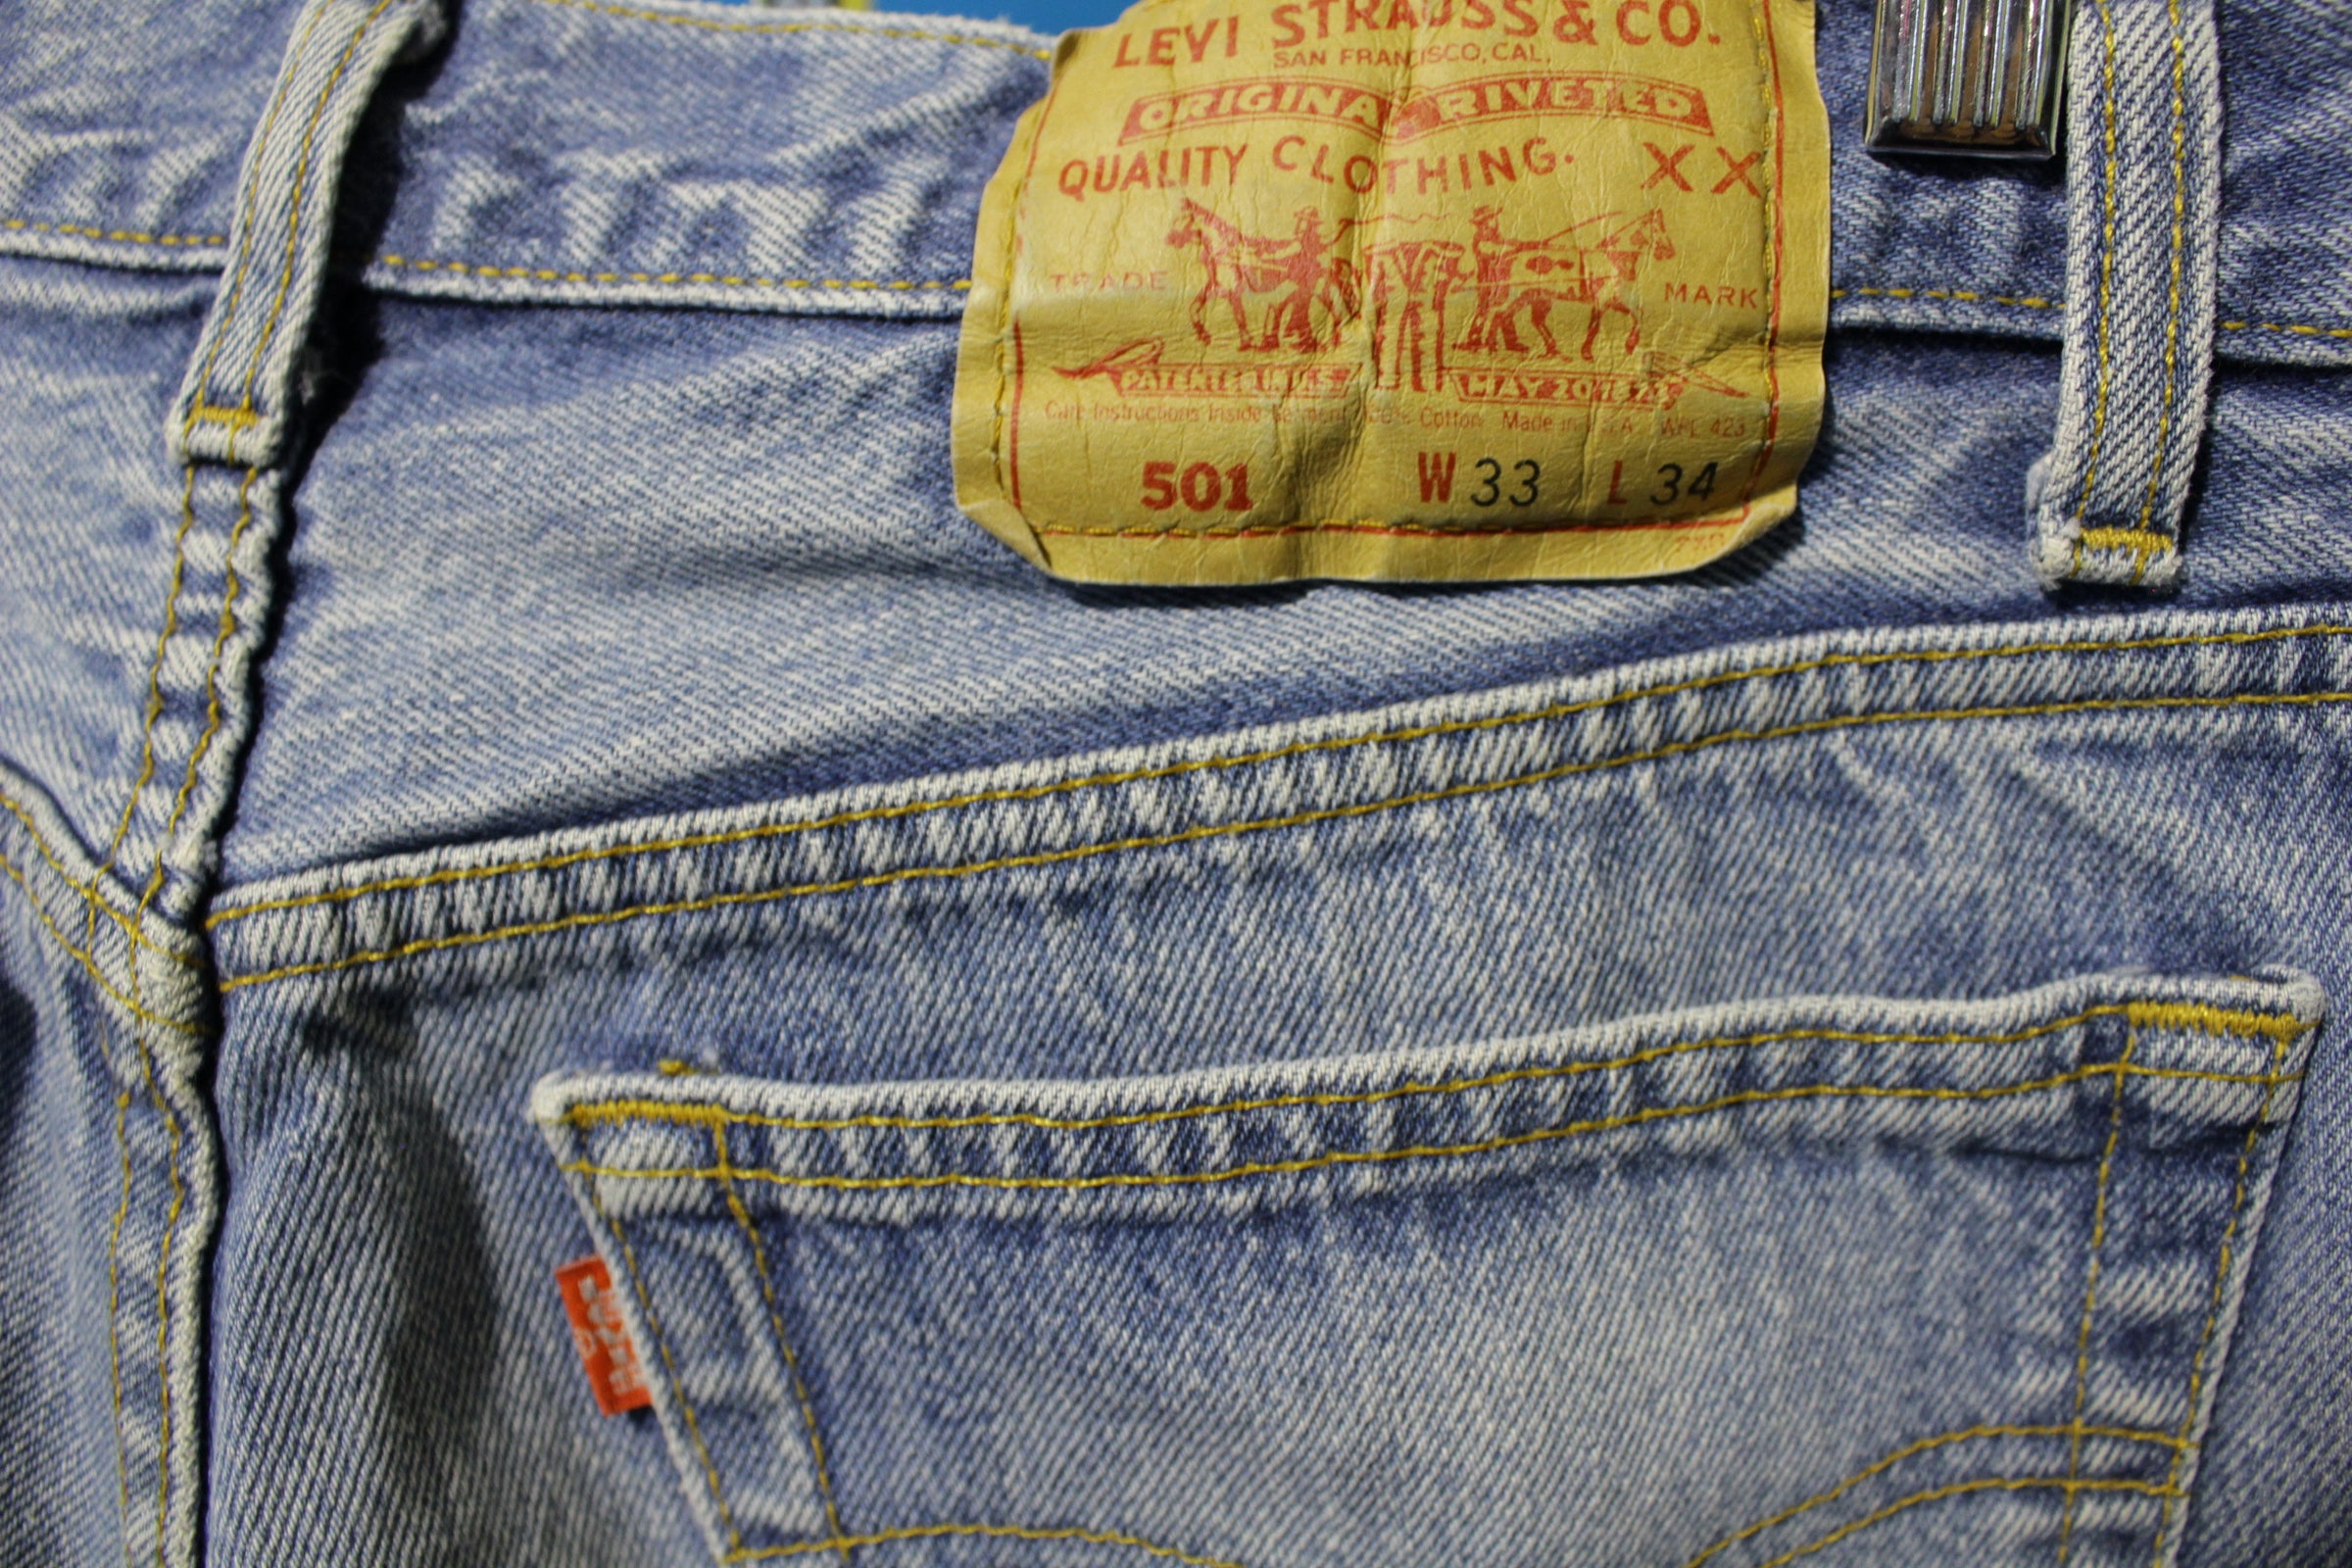 80s Levis 501 Button Fly Jeans. Vintage USA Made Faded Distressed Deni –  thefuzzyfelt